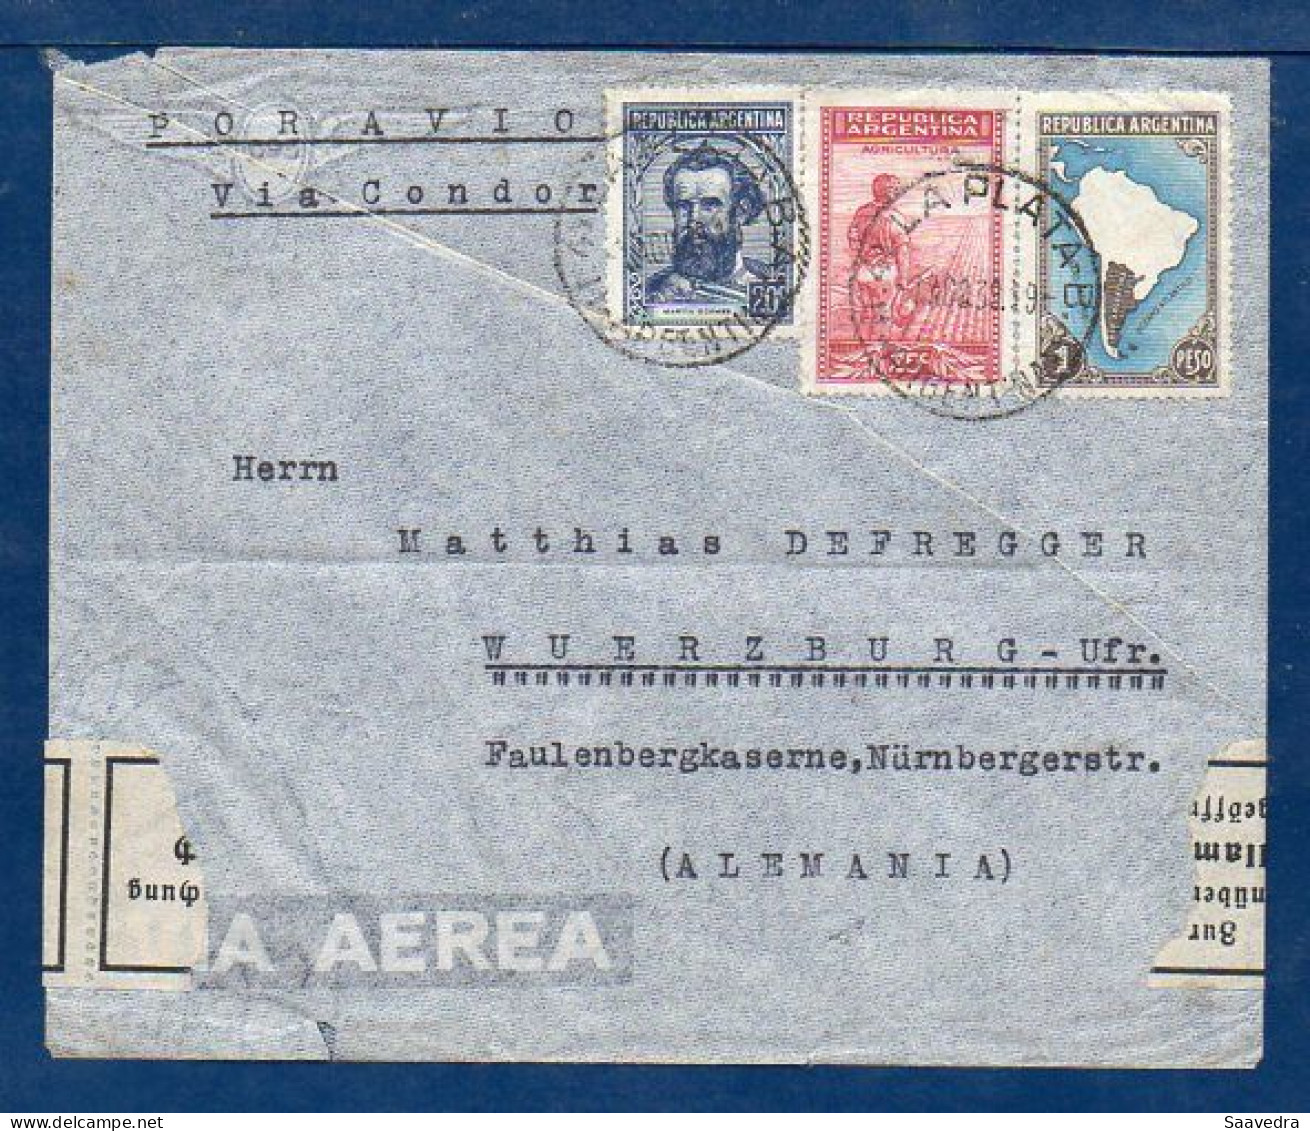 Argentina To Germany, 1939, Last Flight To Europe Via Condor, Flight L-480, Currency Censor Tape, SEE DESCRIPTION  (040) - Poste Aérienne